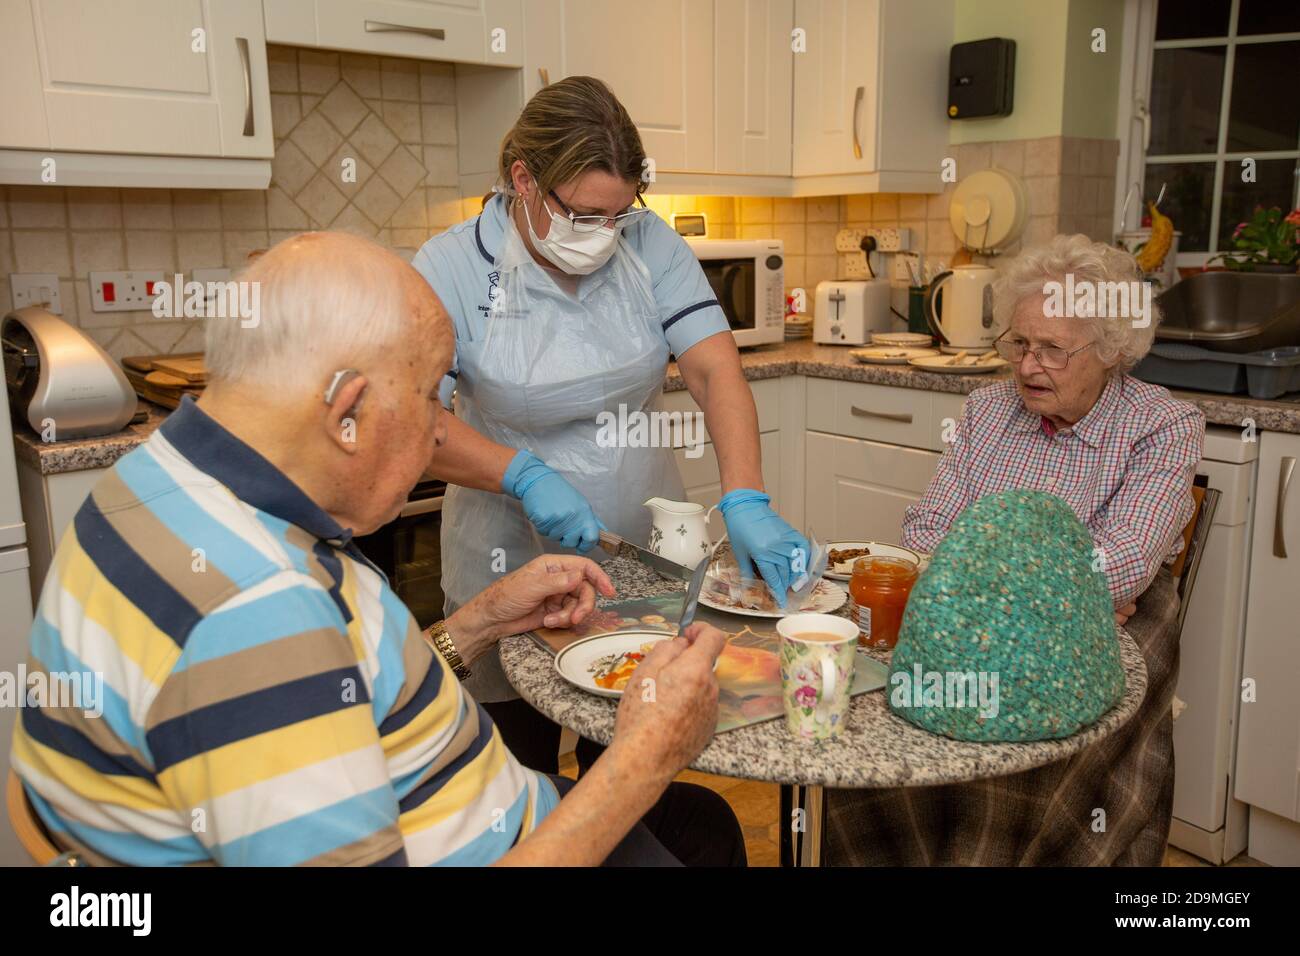 Elderly couple in their 80's at their home having tea served by a social care worker during the coronavirus pandemic lockdown, England, United Kingdom Stock Photo